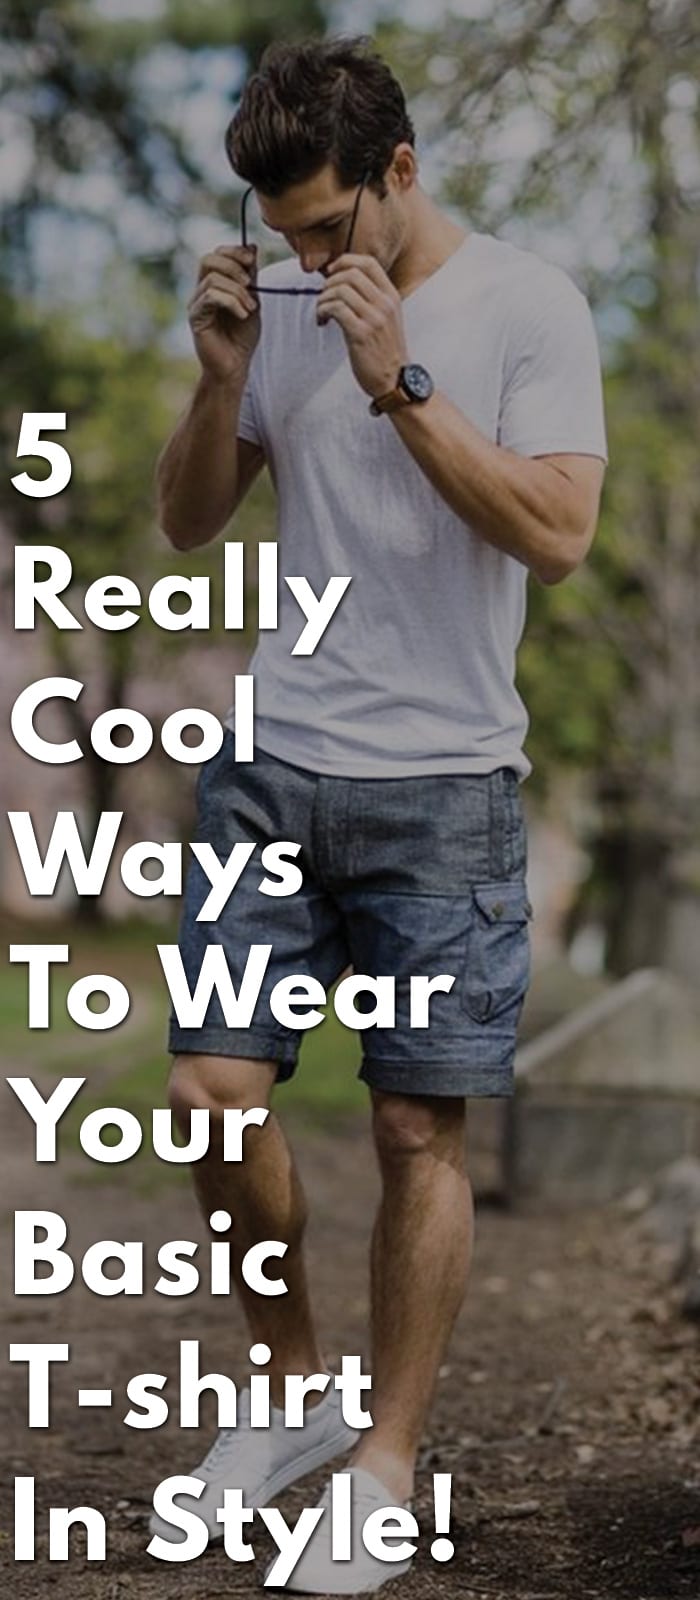 5-Really-Cool-Ways-to-Wear-Your-Basic-T-shirt-in-Style!